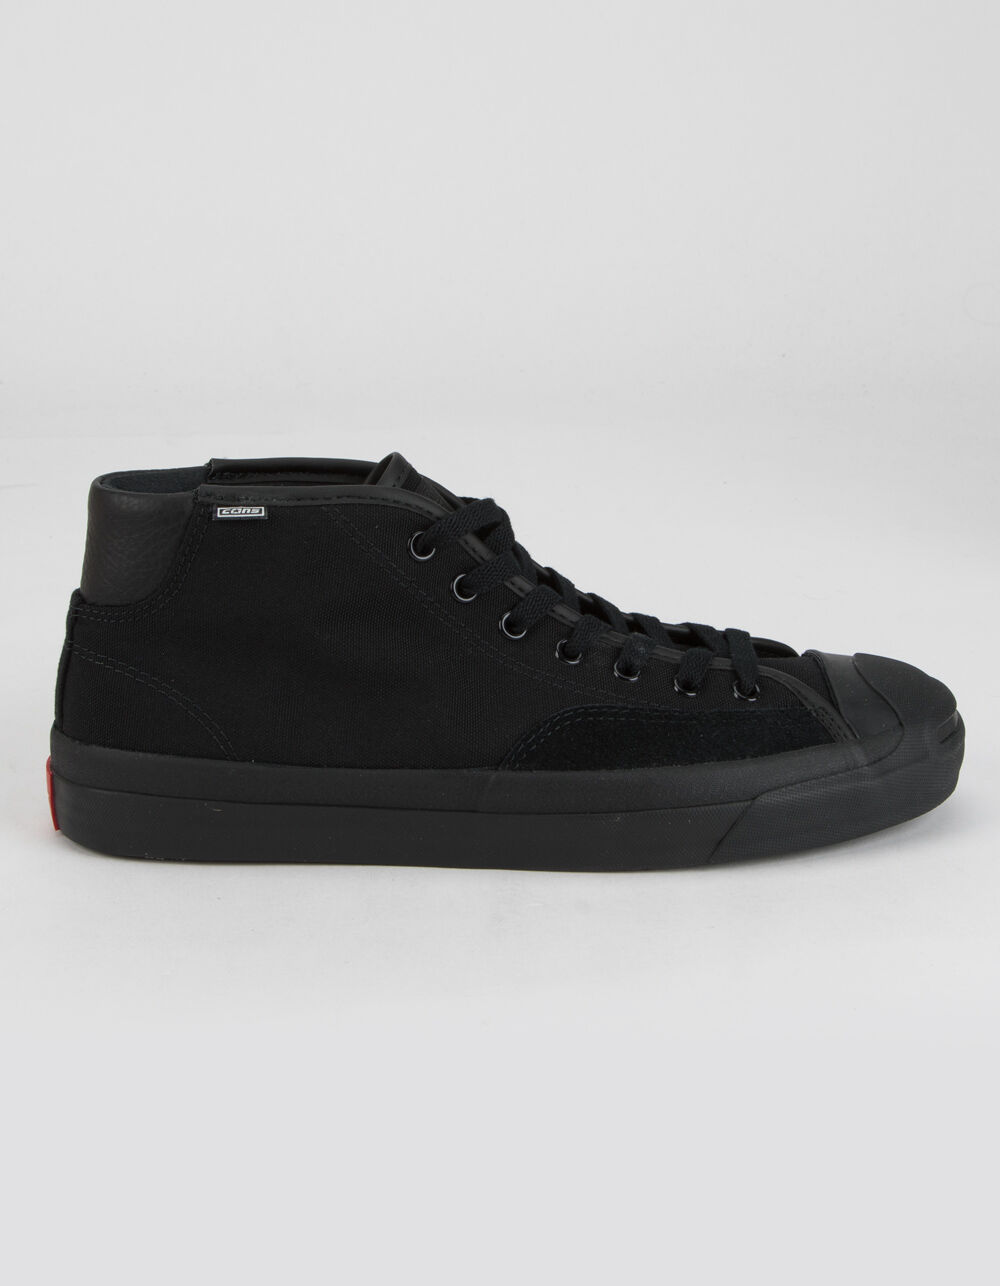 CONVERSE Jack Purcell Pro Mid Shoes - BLACK/BLACK | Tillys